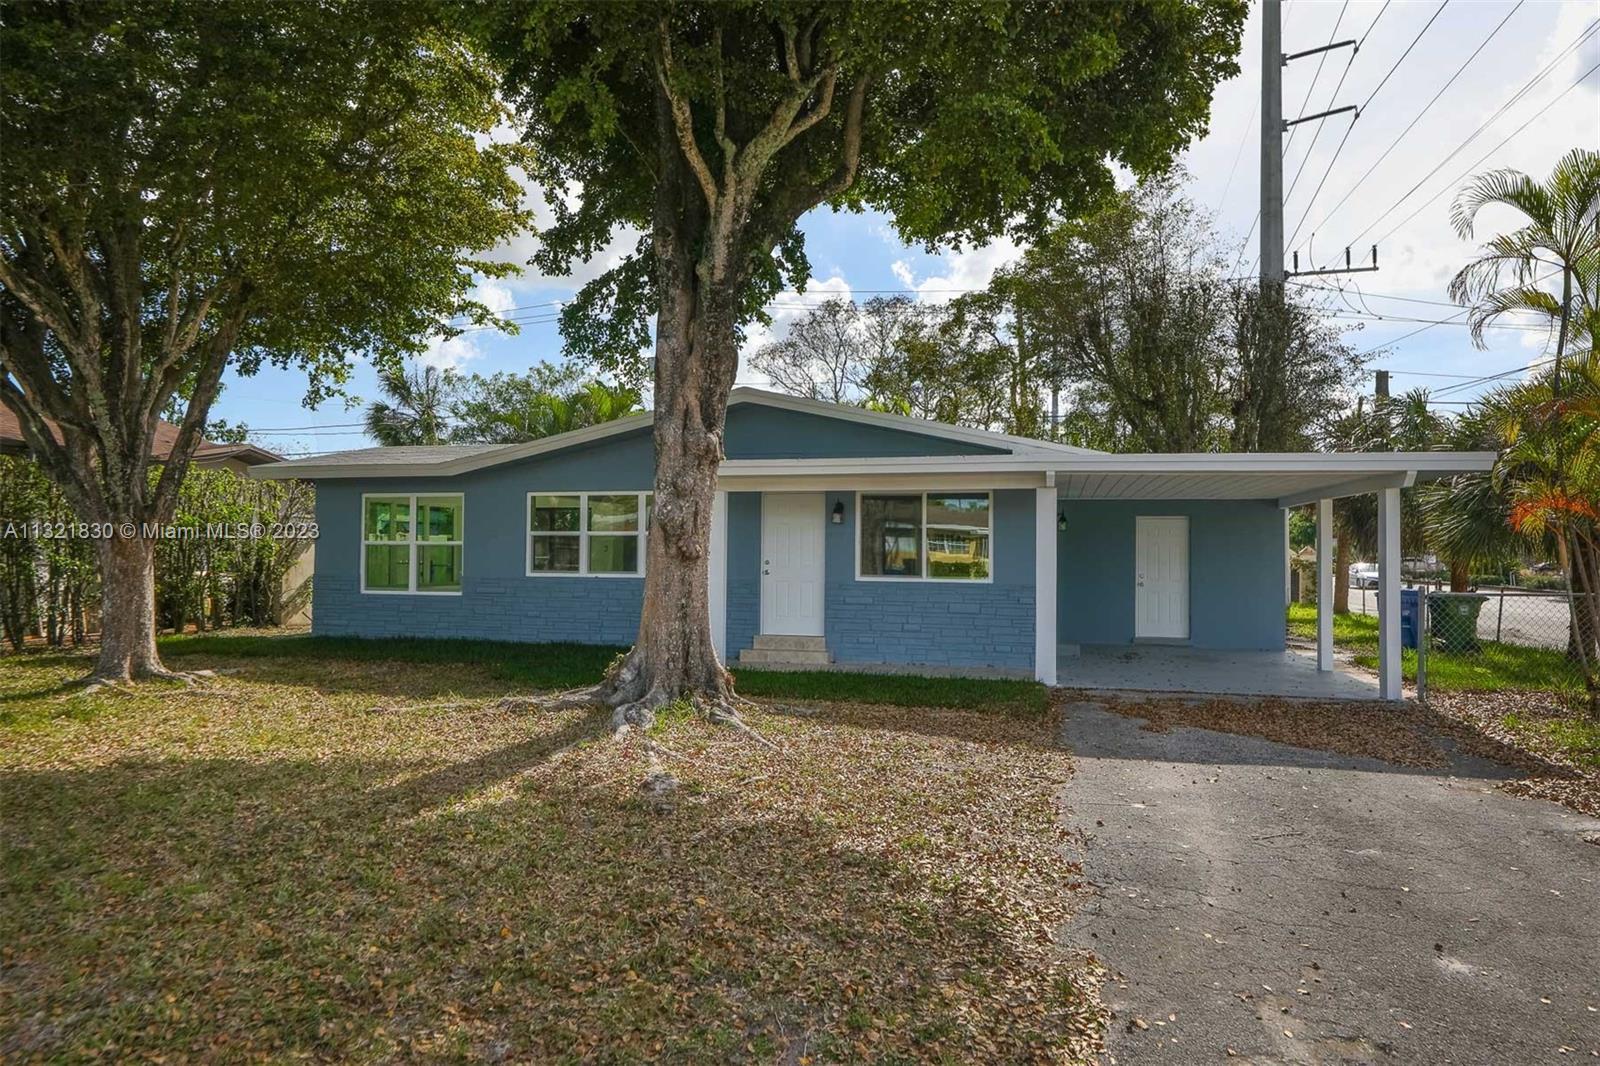 Come check out this fully remodeled home in the heart of desirable Wilton Manors. You are just a sho